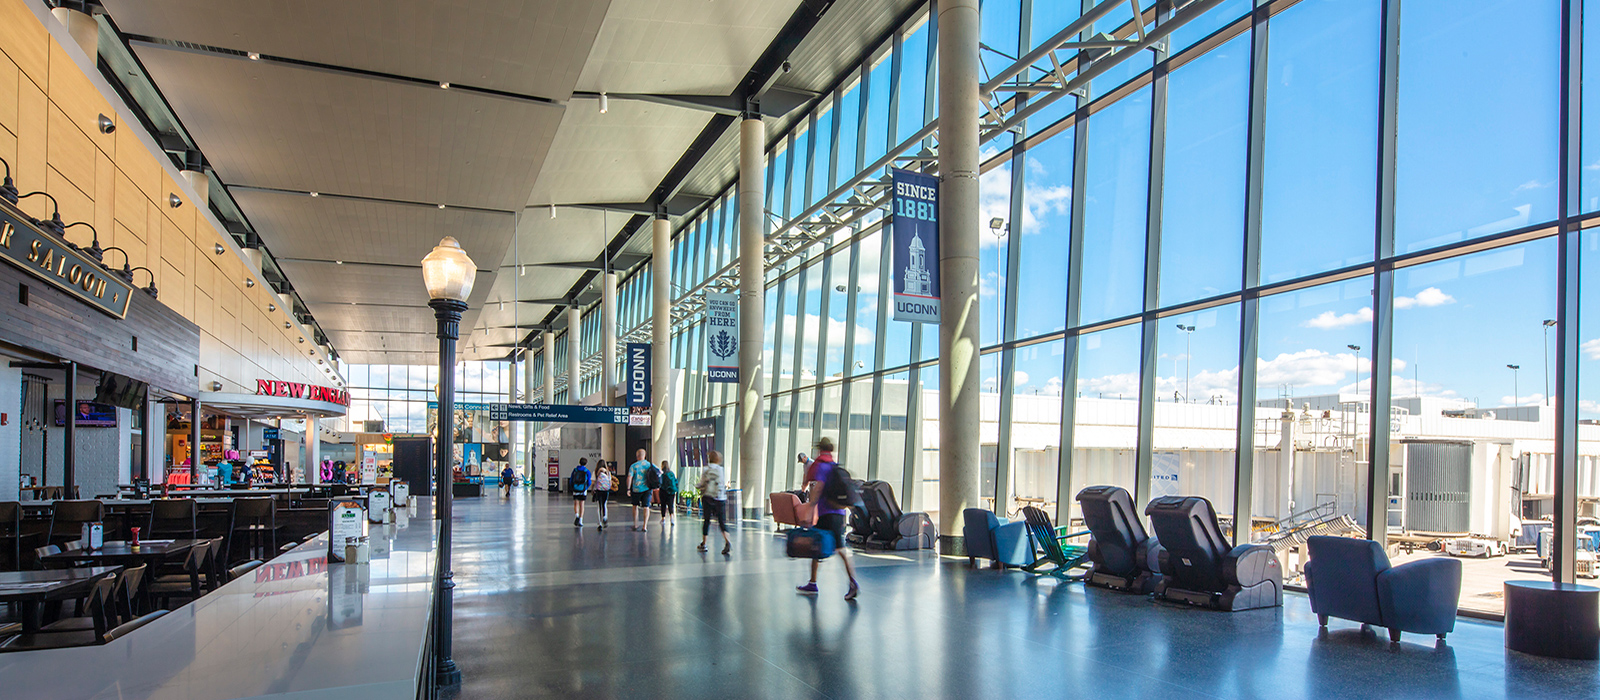 Featured image for Bradley International Airport’s Revenue Bond Rating Upgraded to “A+”